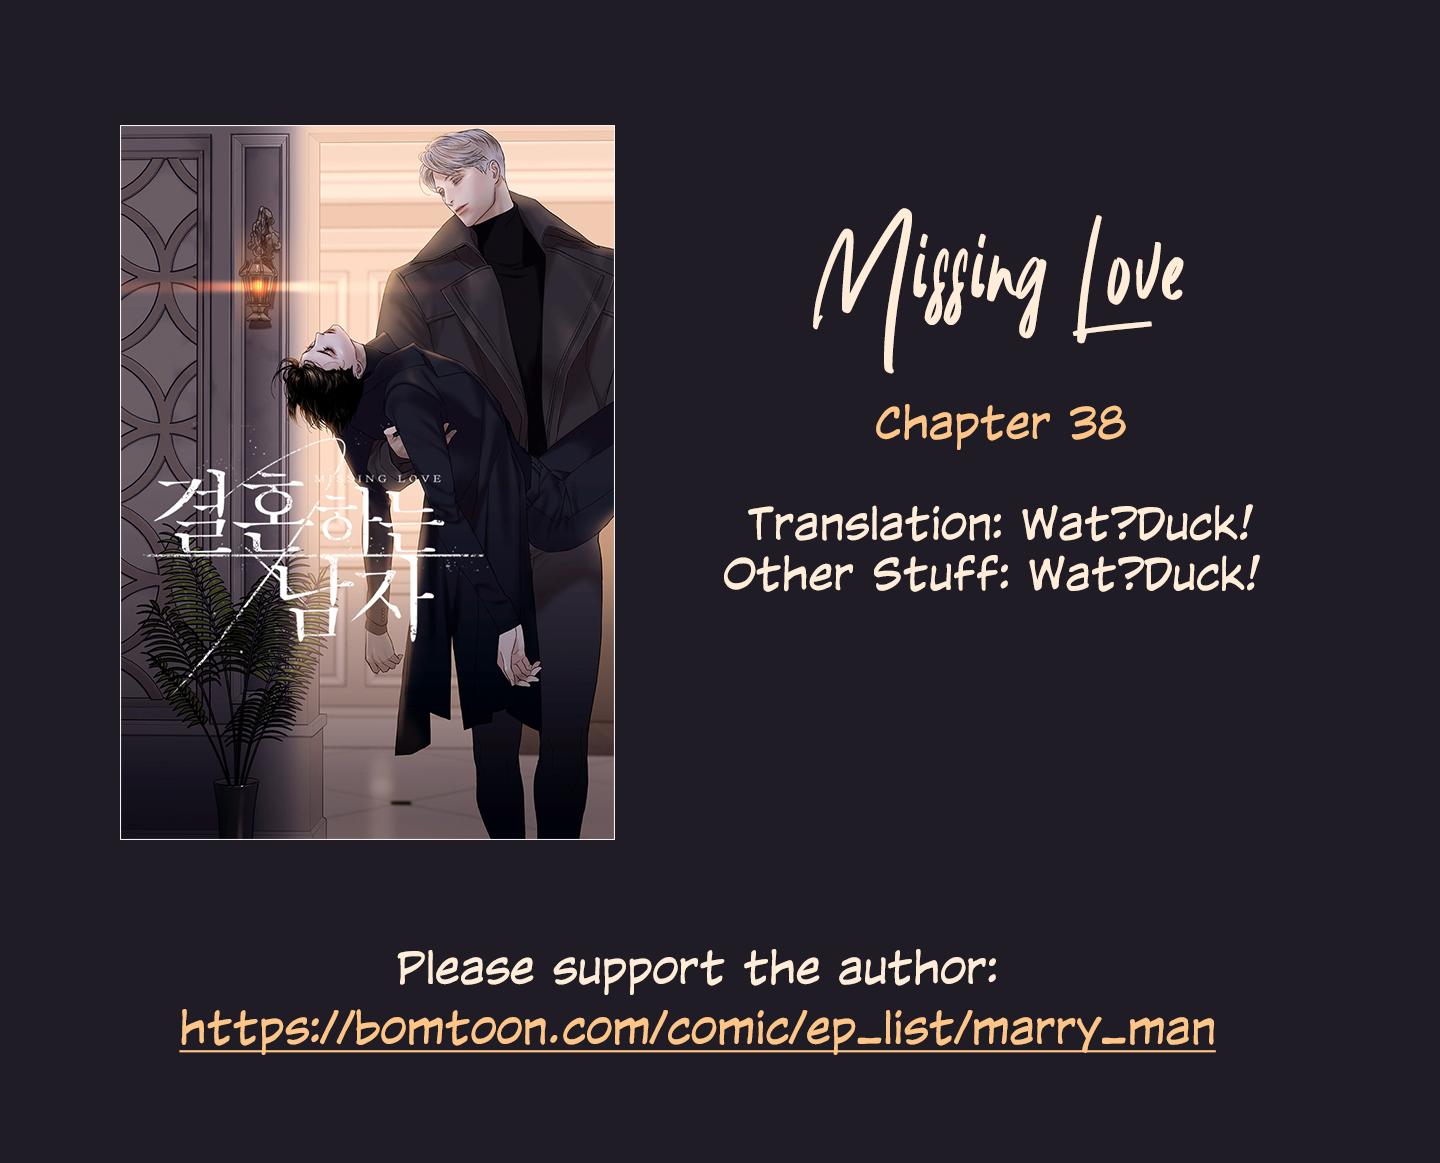 Missing Love: A Married Man - Page 1